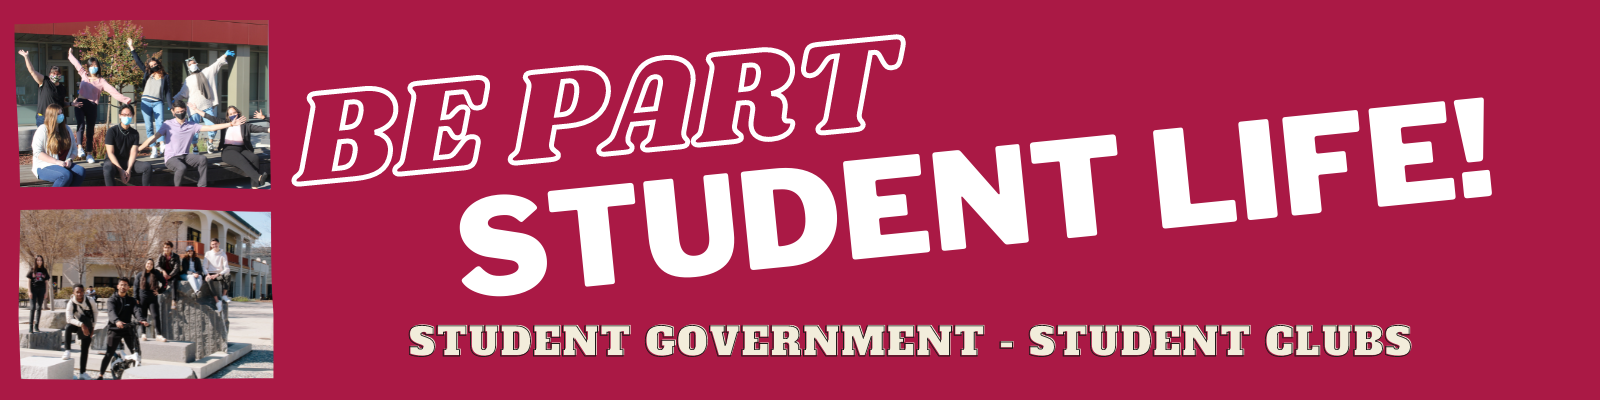 Be Part of Student Life Student Government and Student Clubs